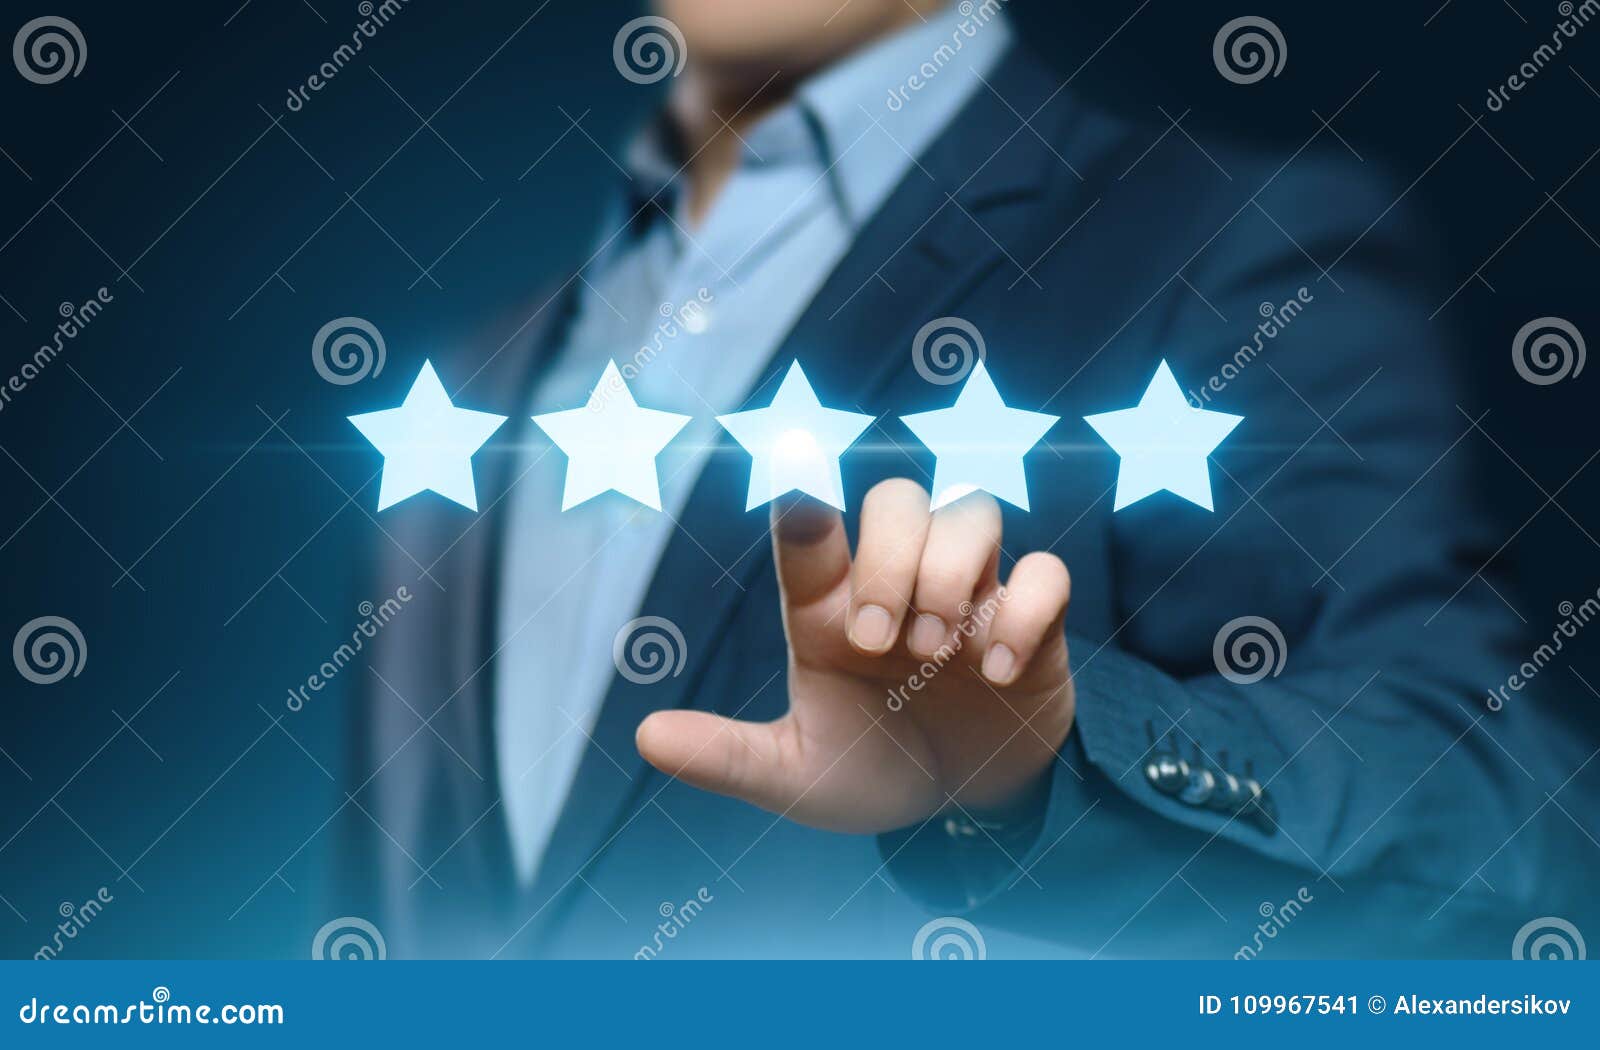 Five Star Rating Or Ranking, Benchmarking Concept. Man Assesses Service ...